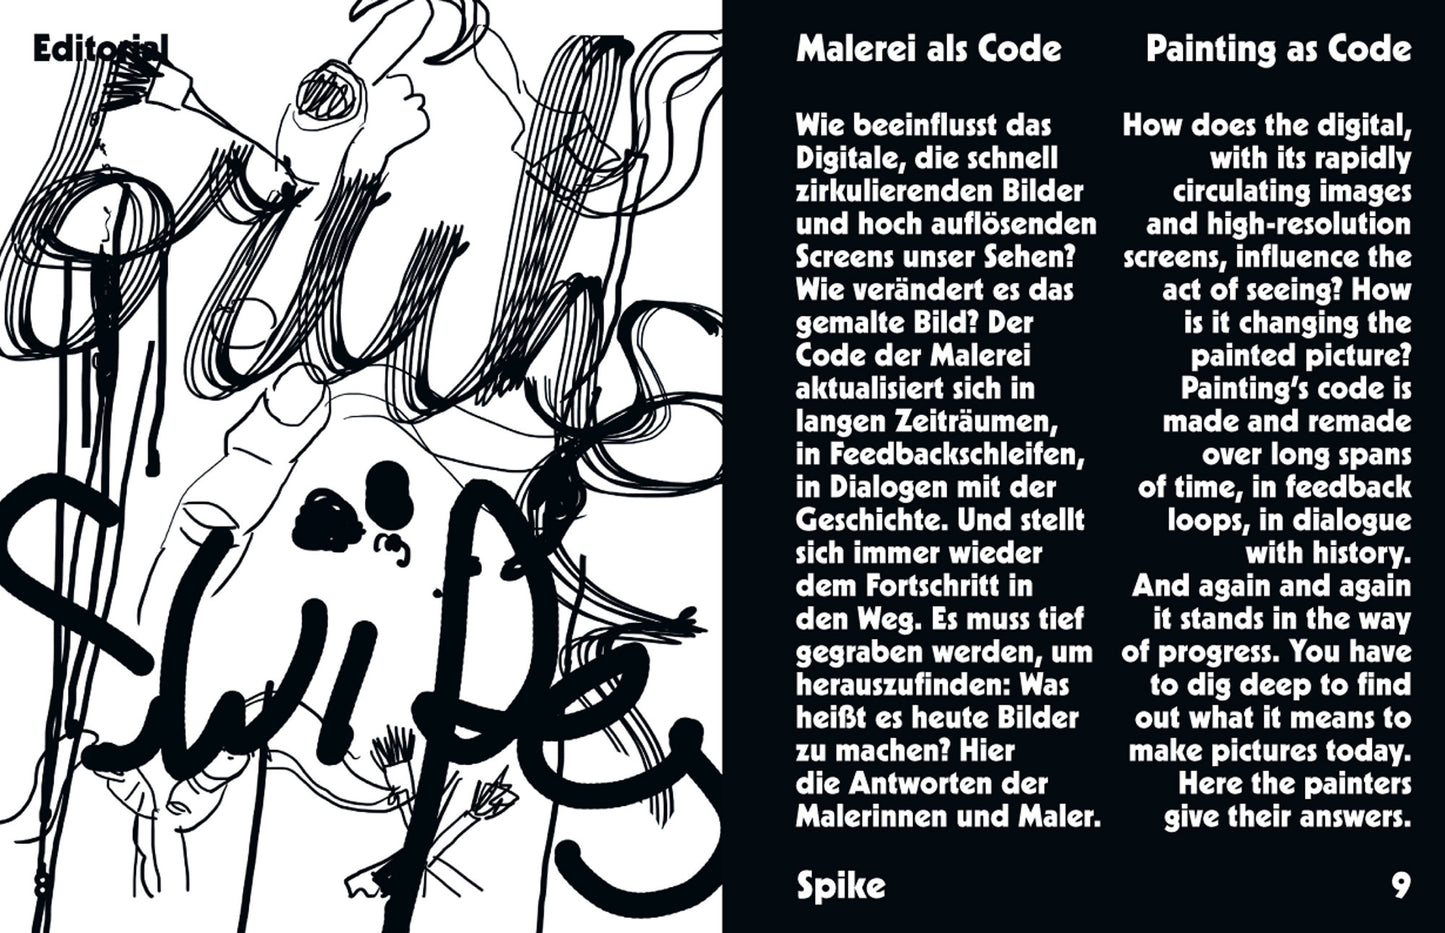 Spike ePaper (Issue 44): Painting as Code